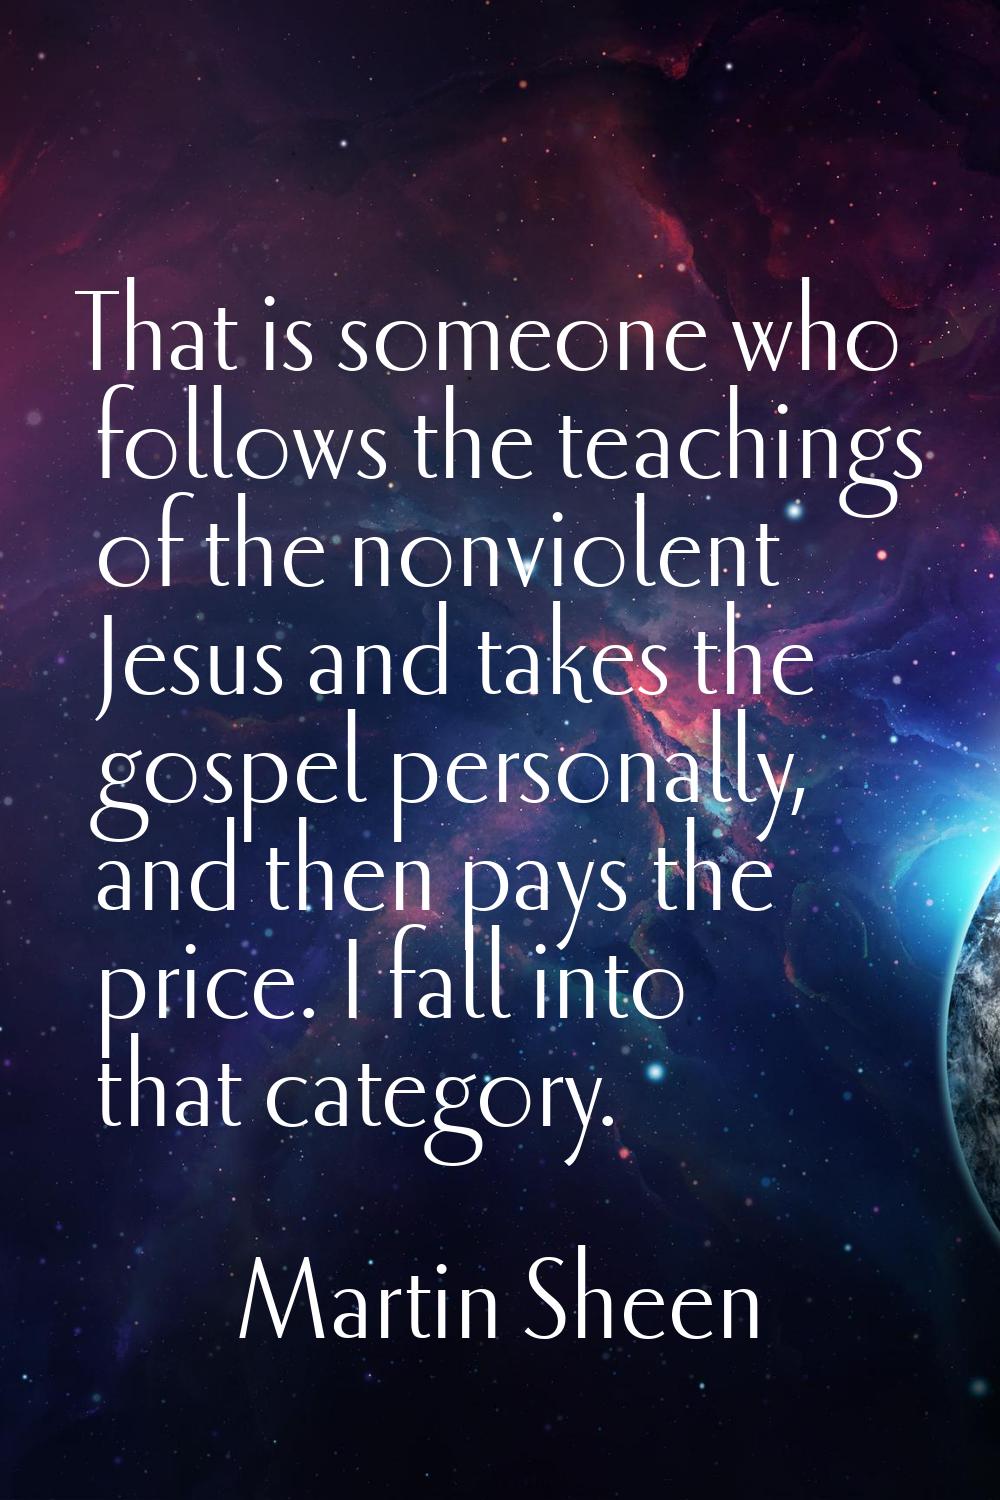 That is someone who follows the teachings of the nonviolent Jesus and takes the gospel personally, 